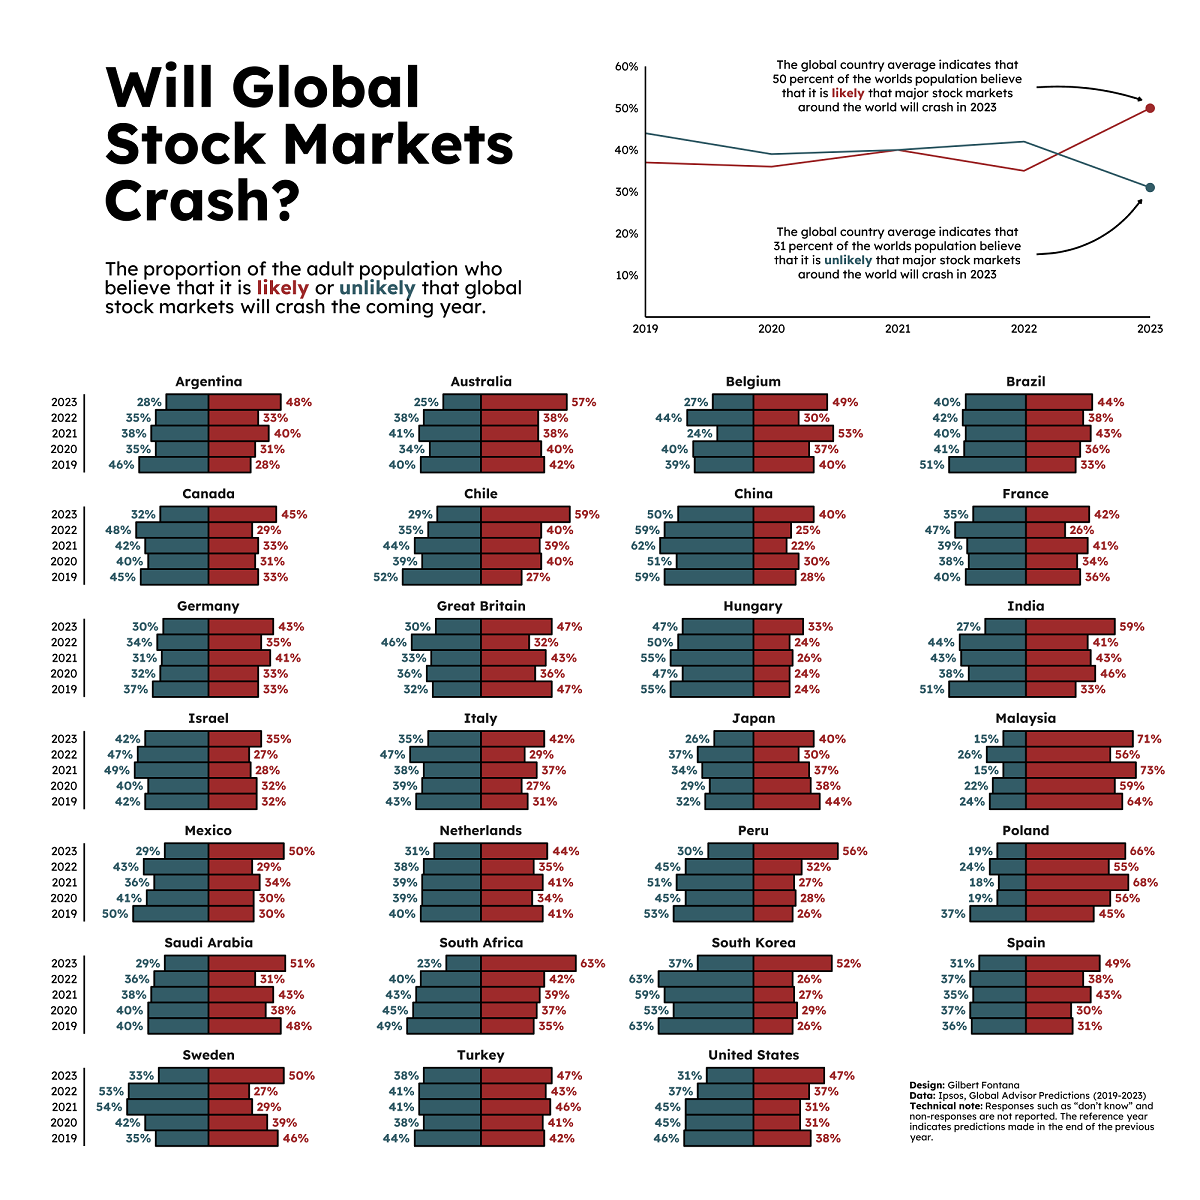 how likely is it that global stock markets will crash, according to country predictions